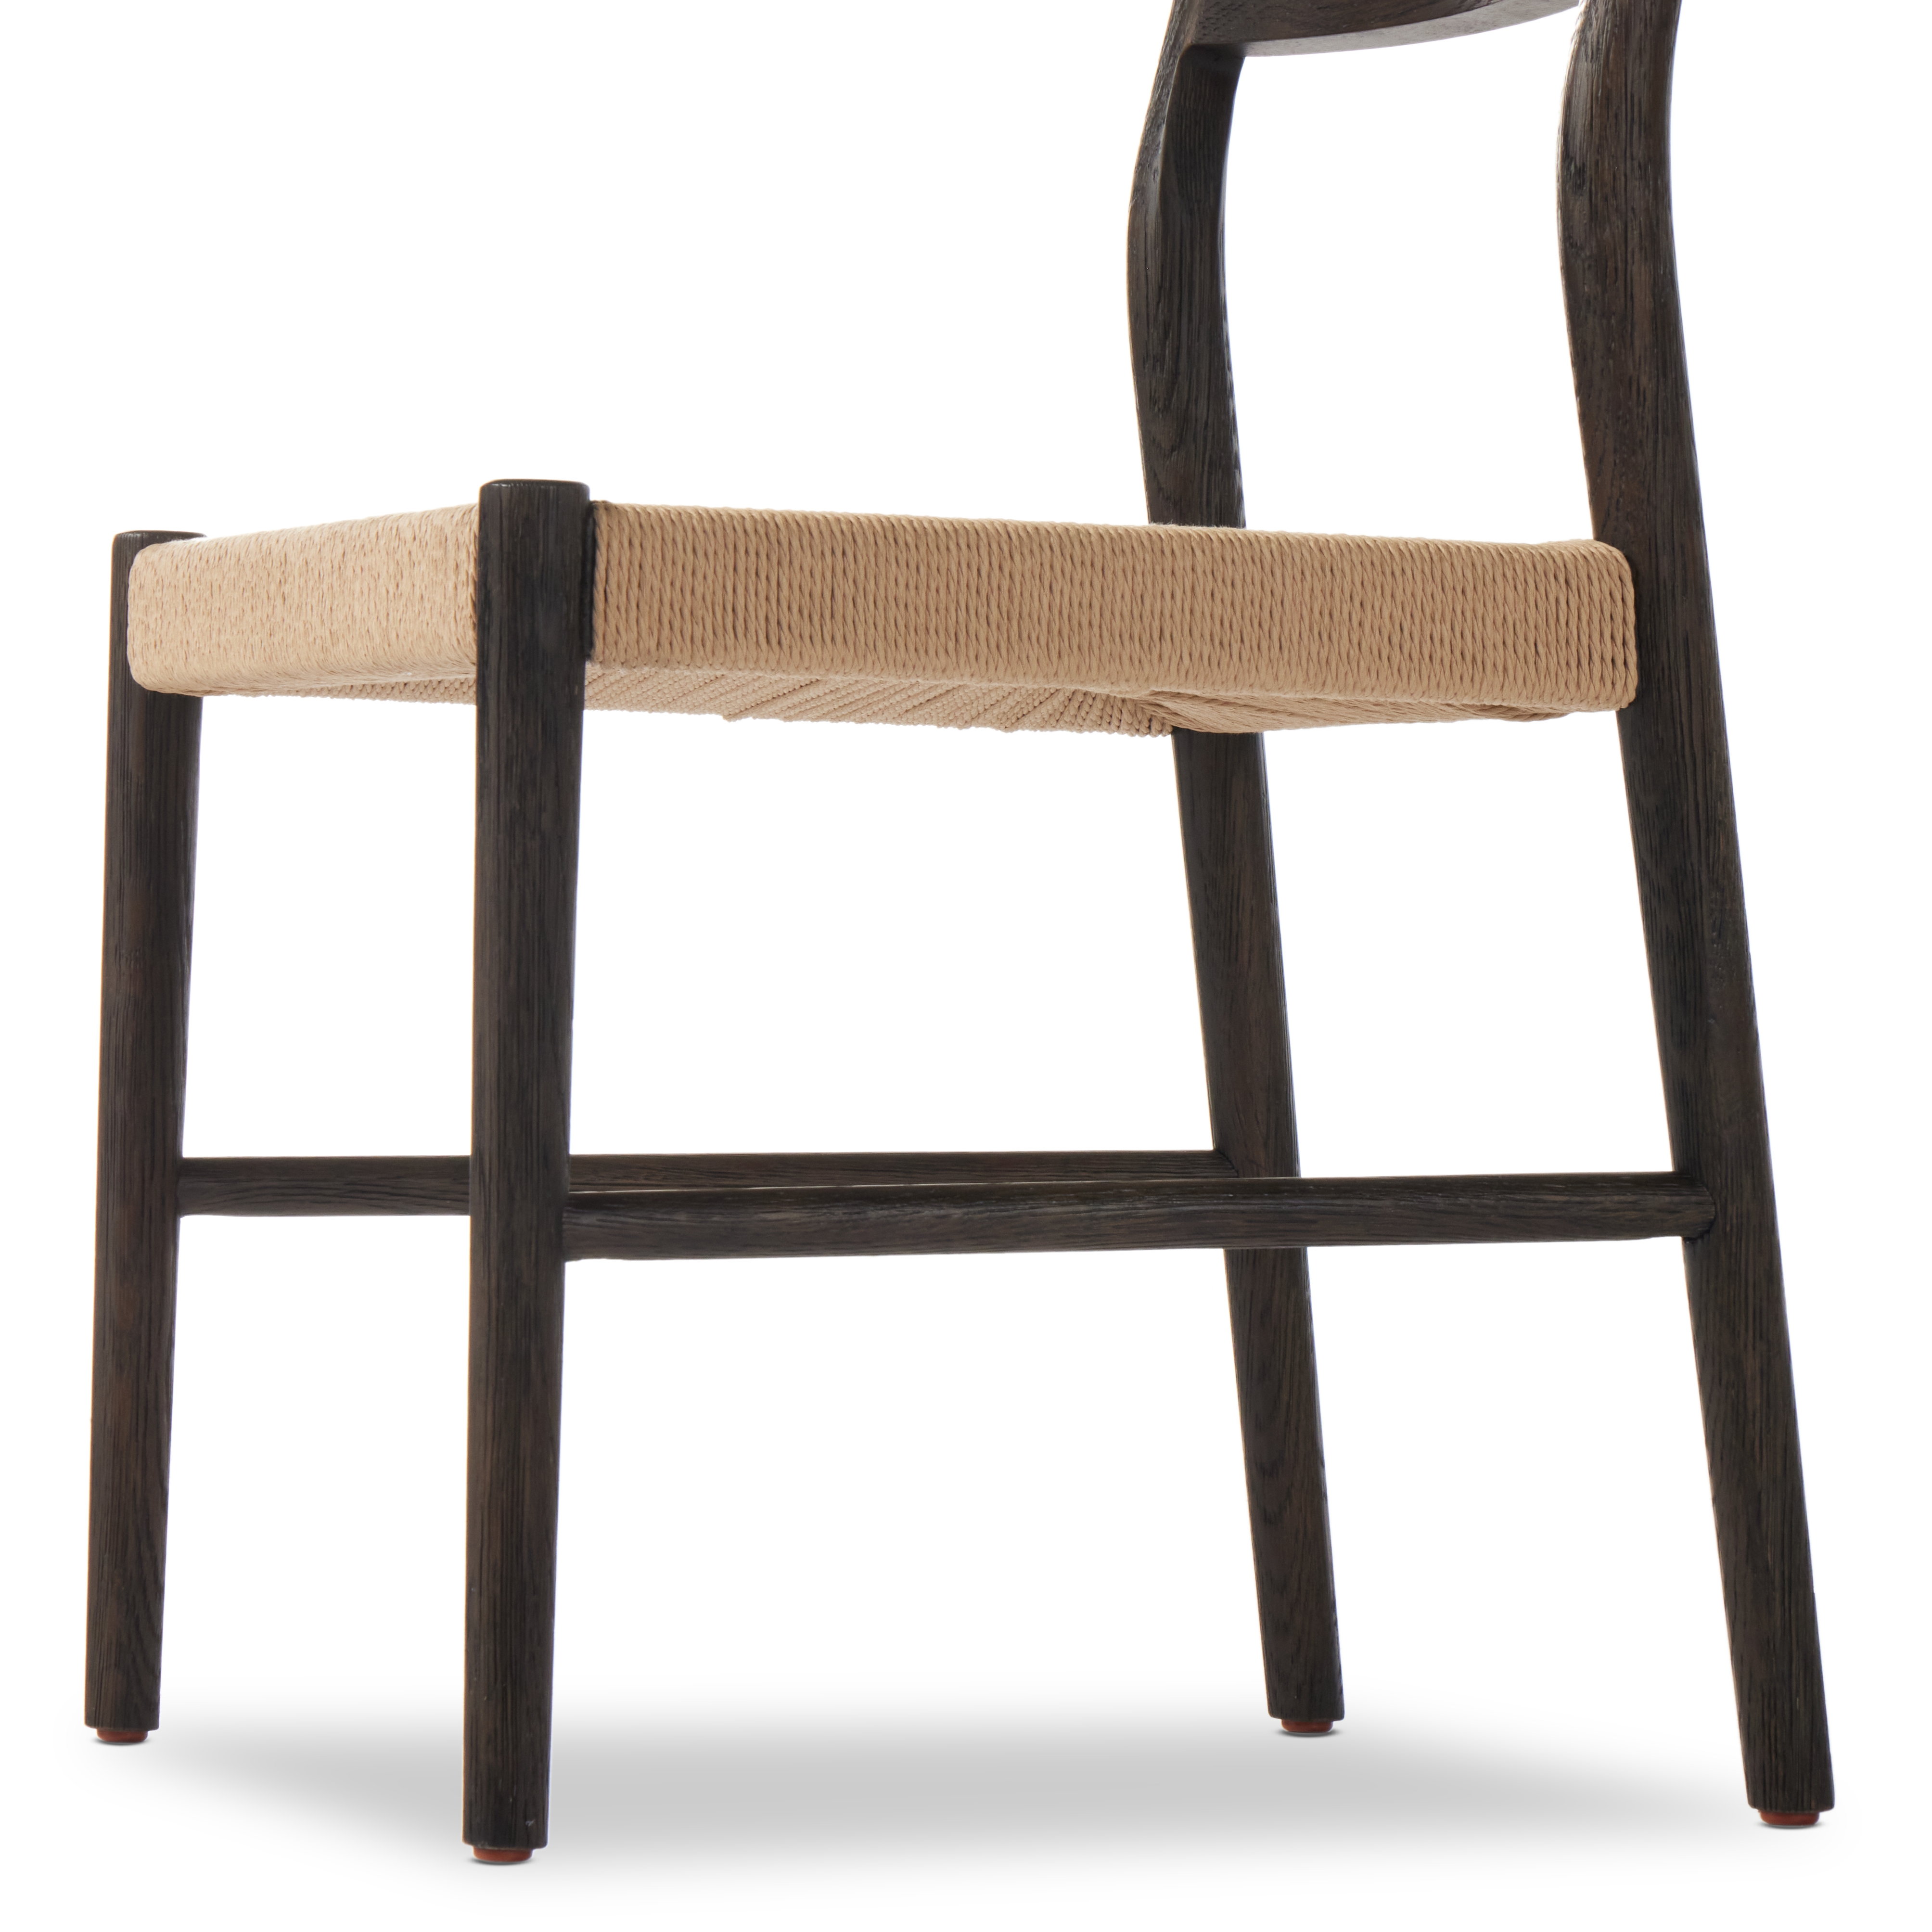 Glenmore Woven Dining Chair-Light Carbon - Image 9